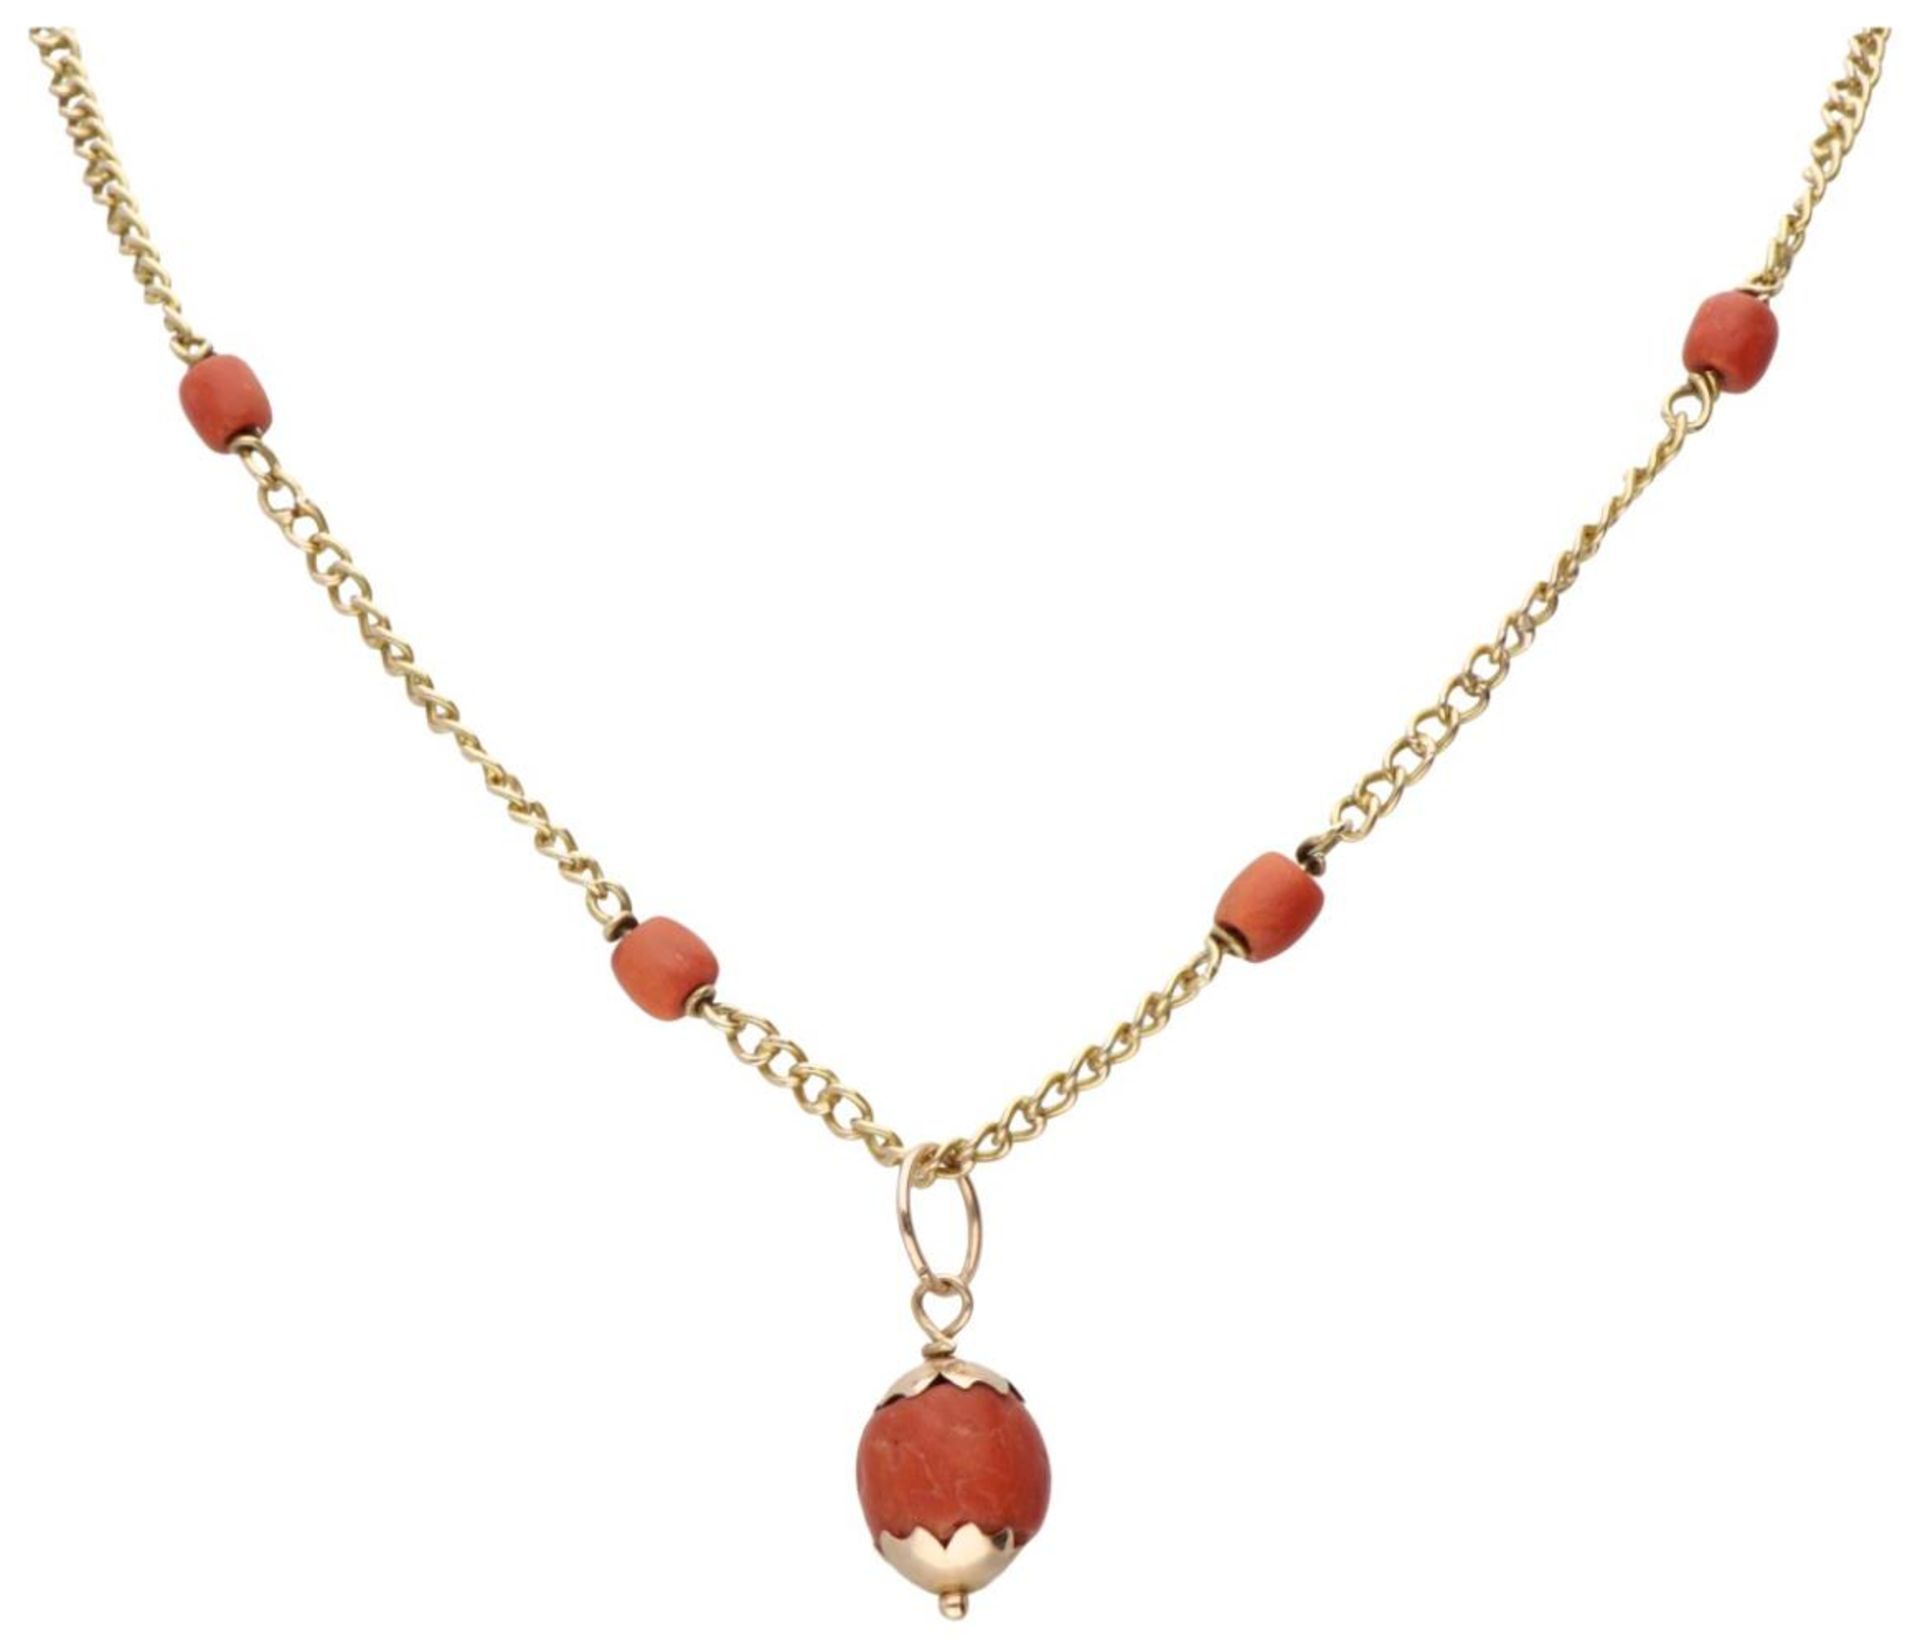 14K. Yellow gold vintage necklace and pendant set with red corals.